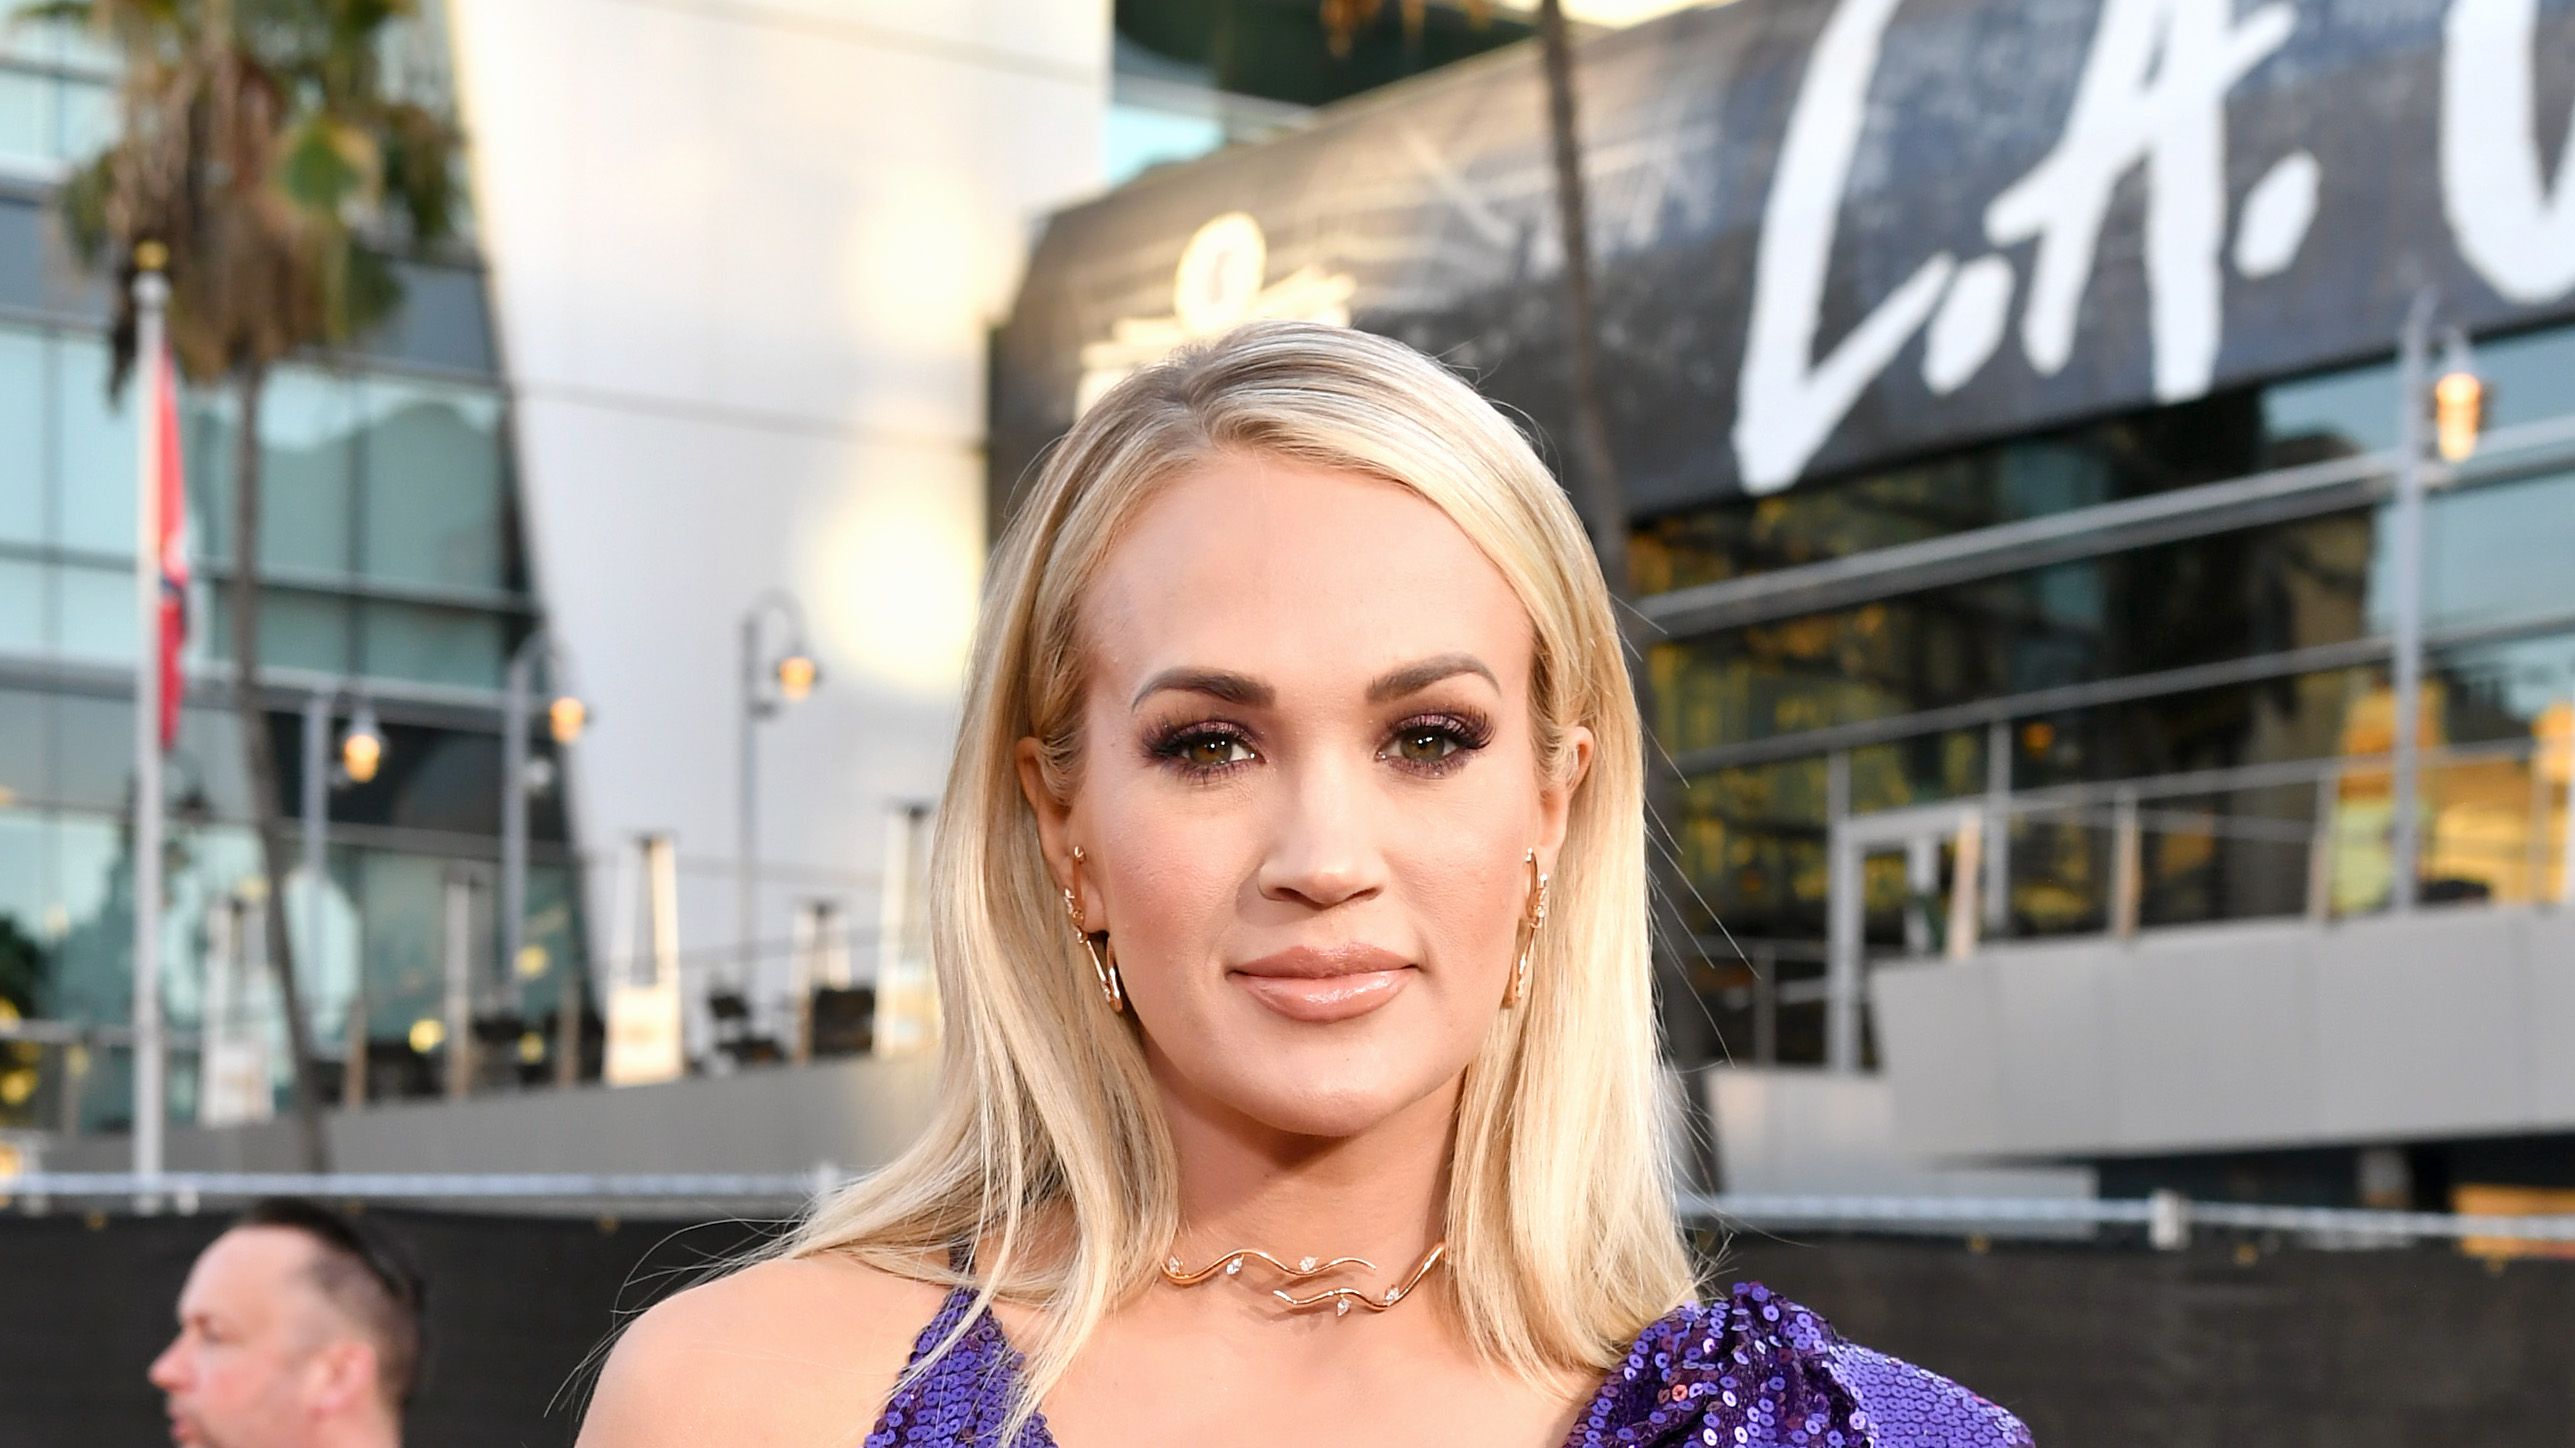 Carrie Underwood joins country artists with fashion line